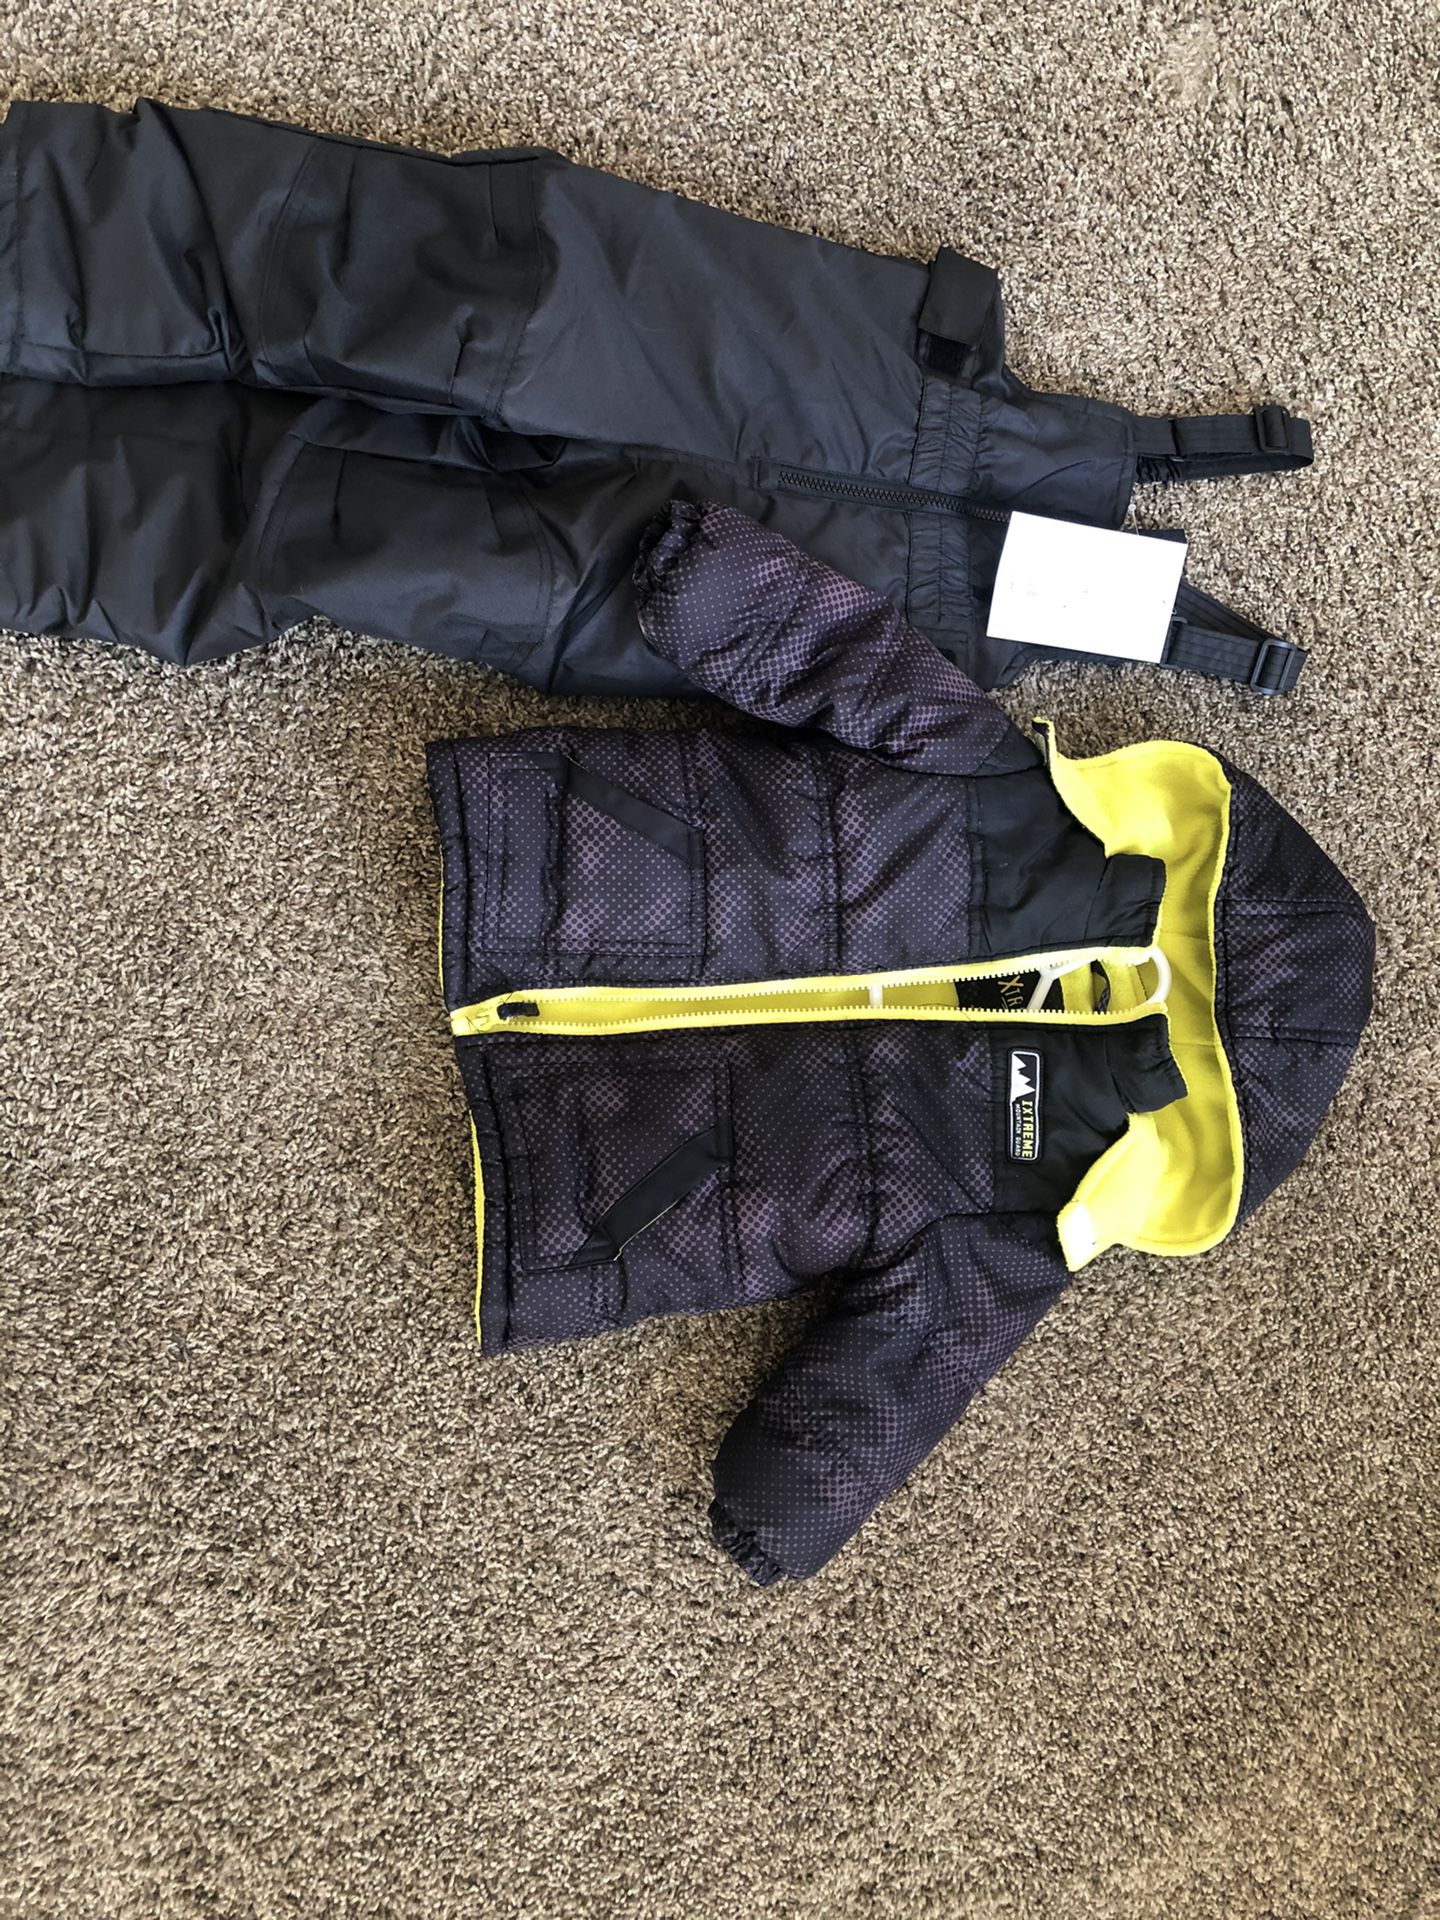 Thick winter Jacket & snow suit